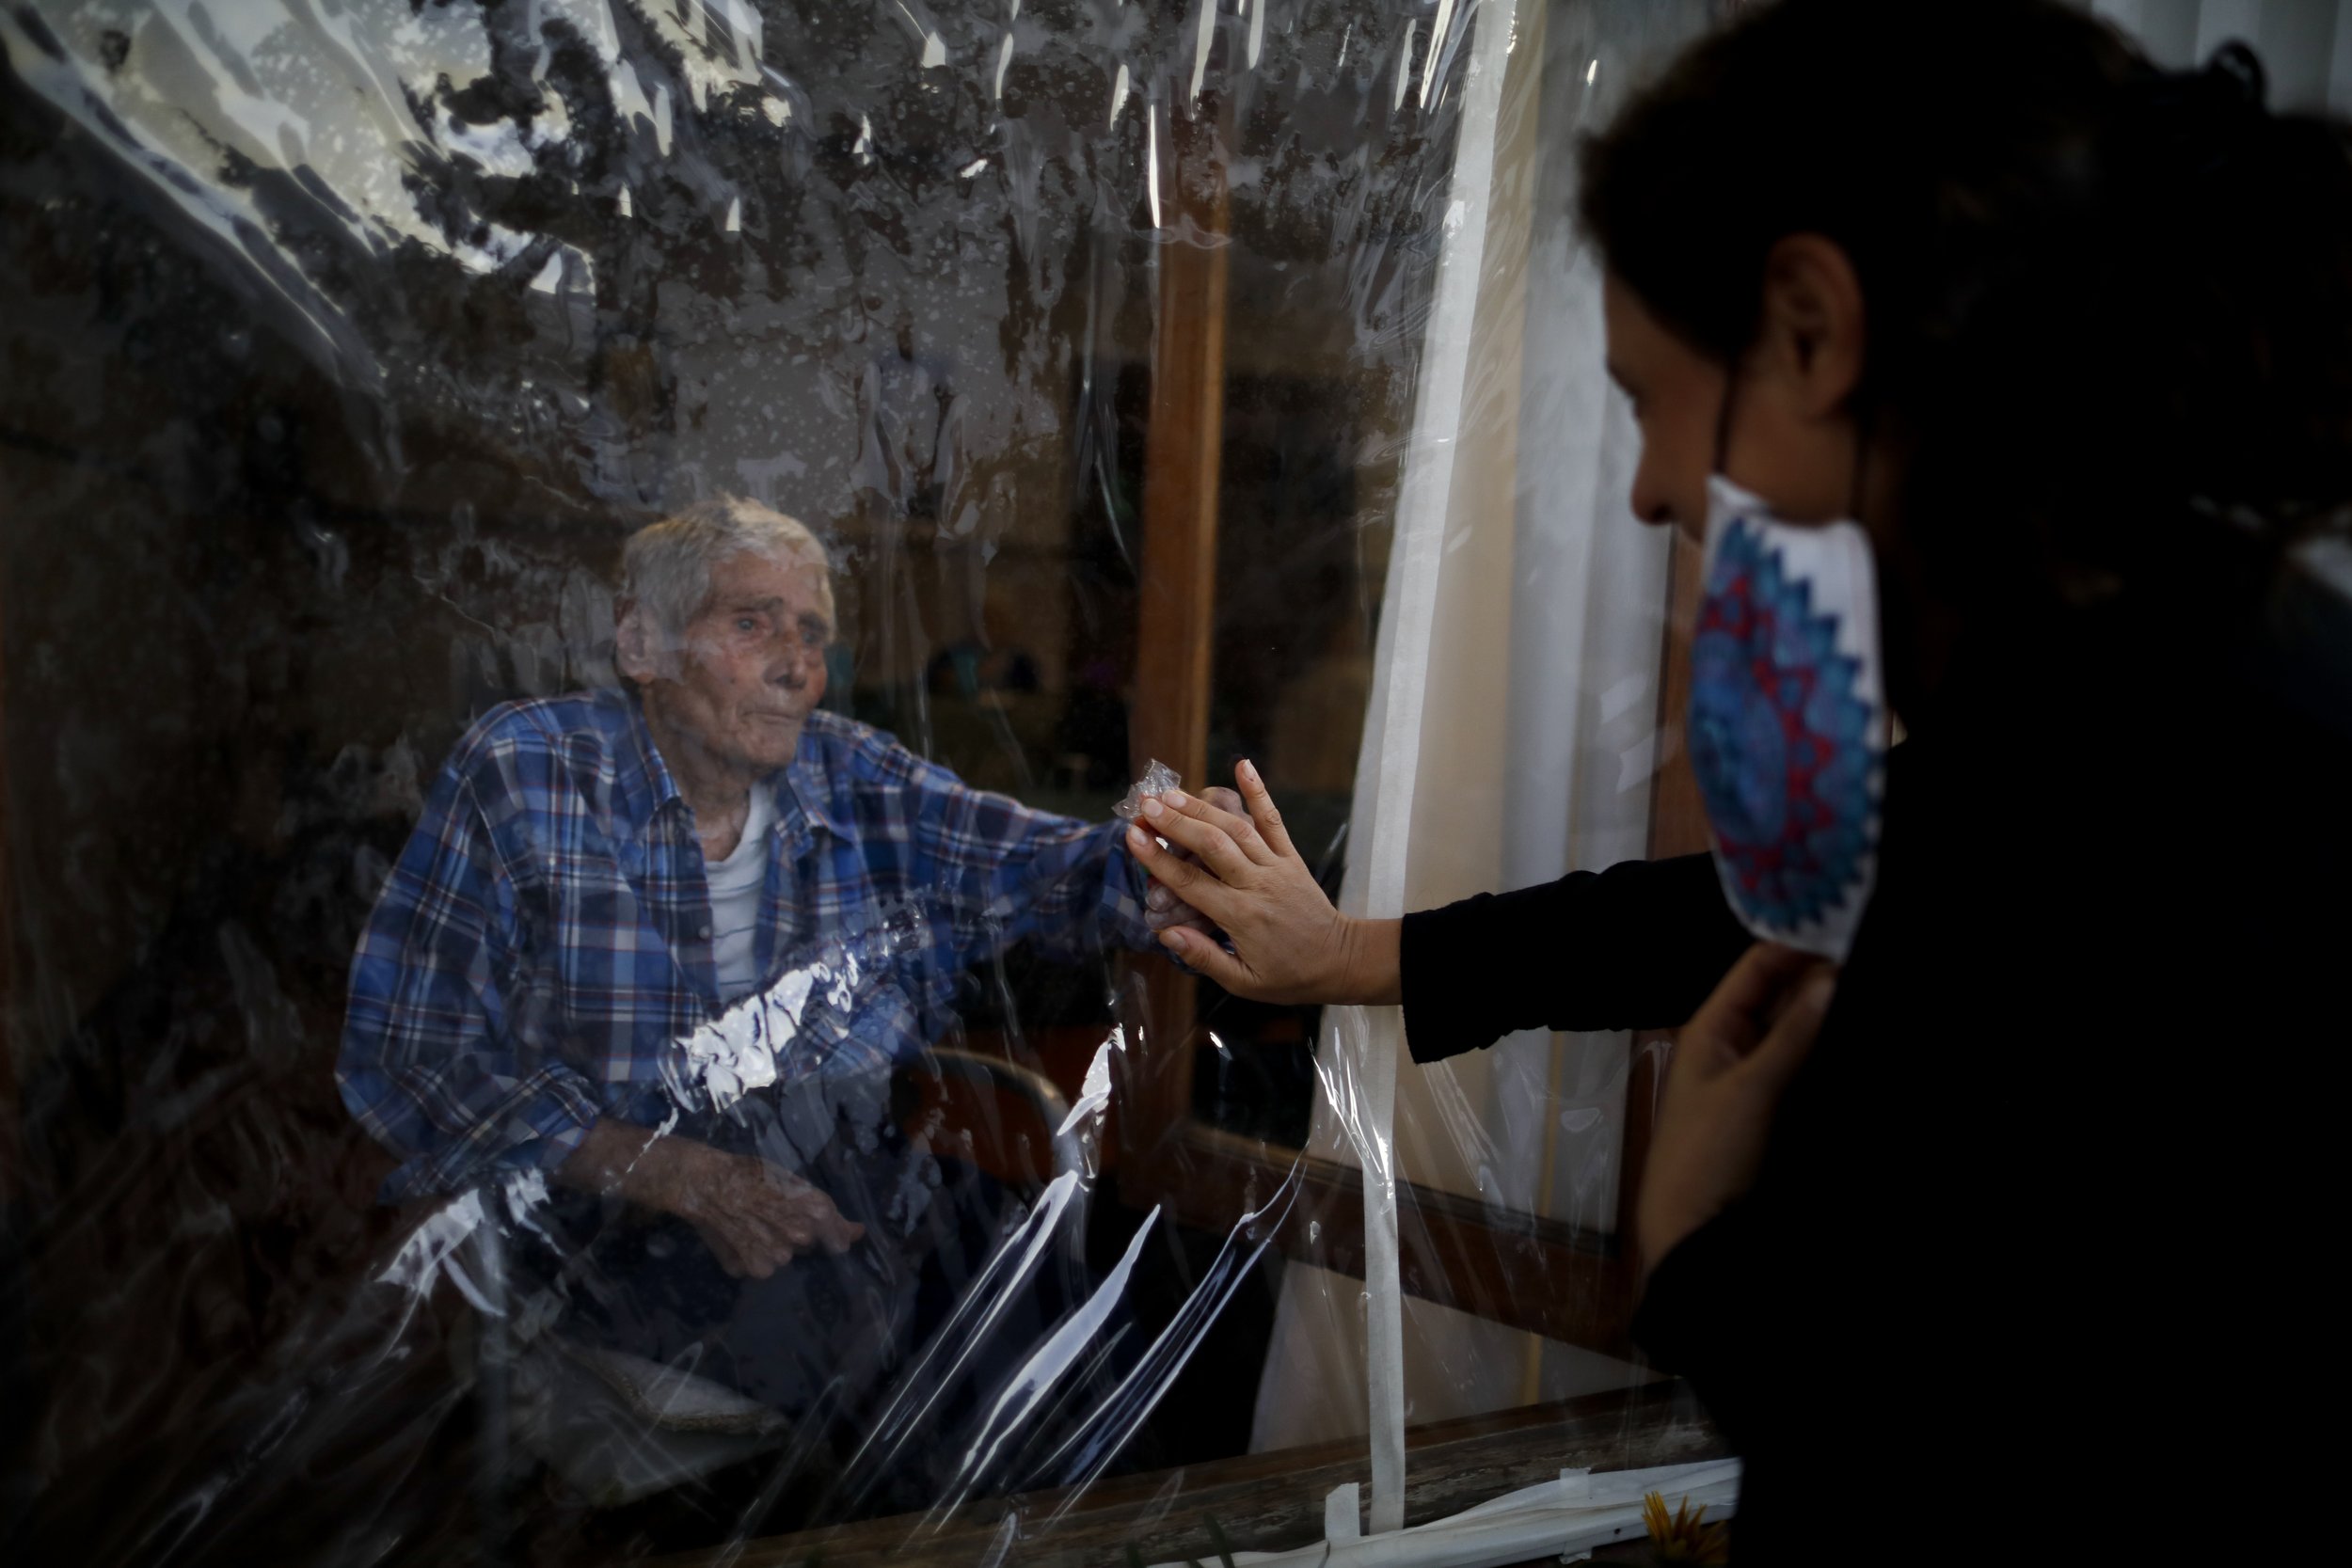  Victor Tripiana, 86, reaches out to touch the hand of his daughter-in-law, Silvia Fernandez Sotto, separated by a plastic sheet to prevent the spread of COVID-19, at the Reminiscencias residence for the elderly in Tandil, Argentina, on April 4, 2021